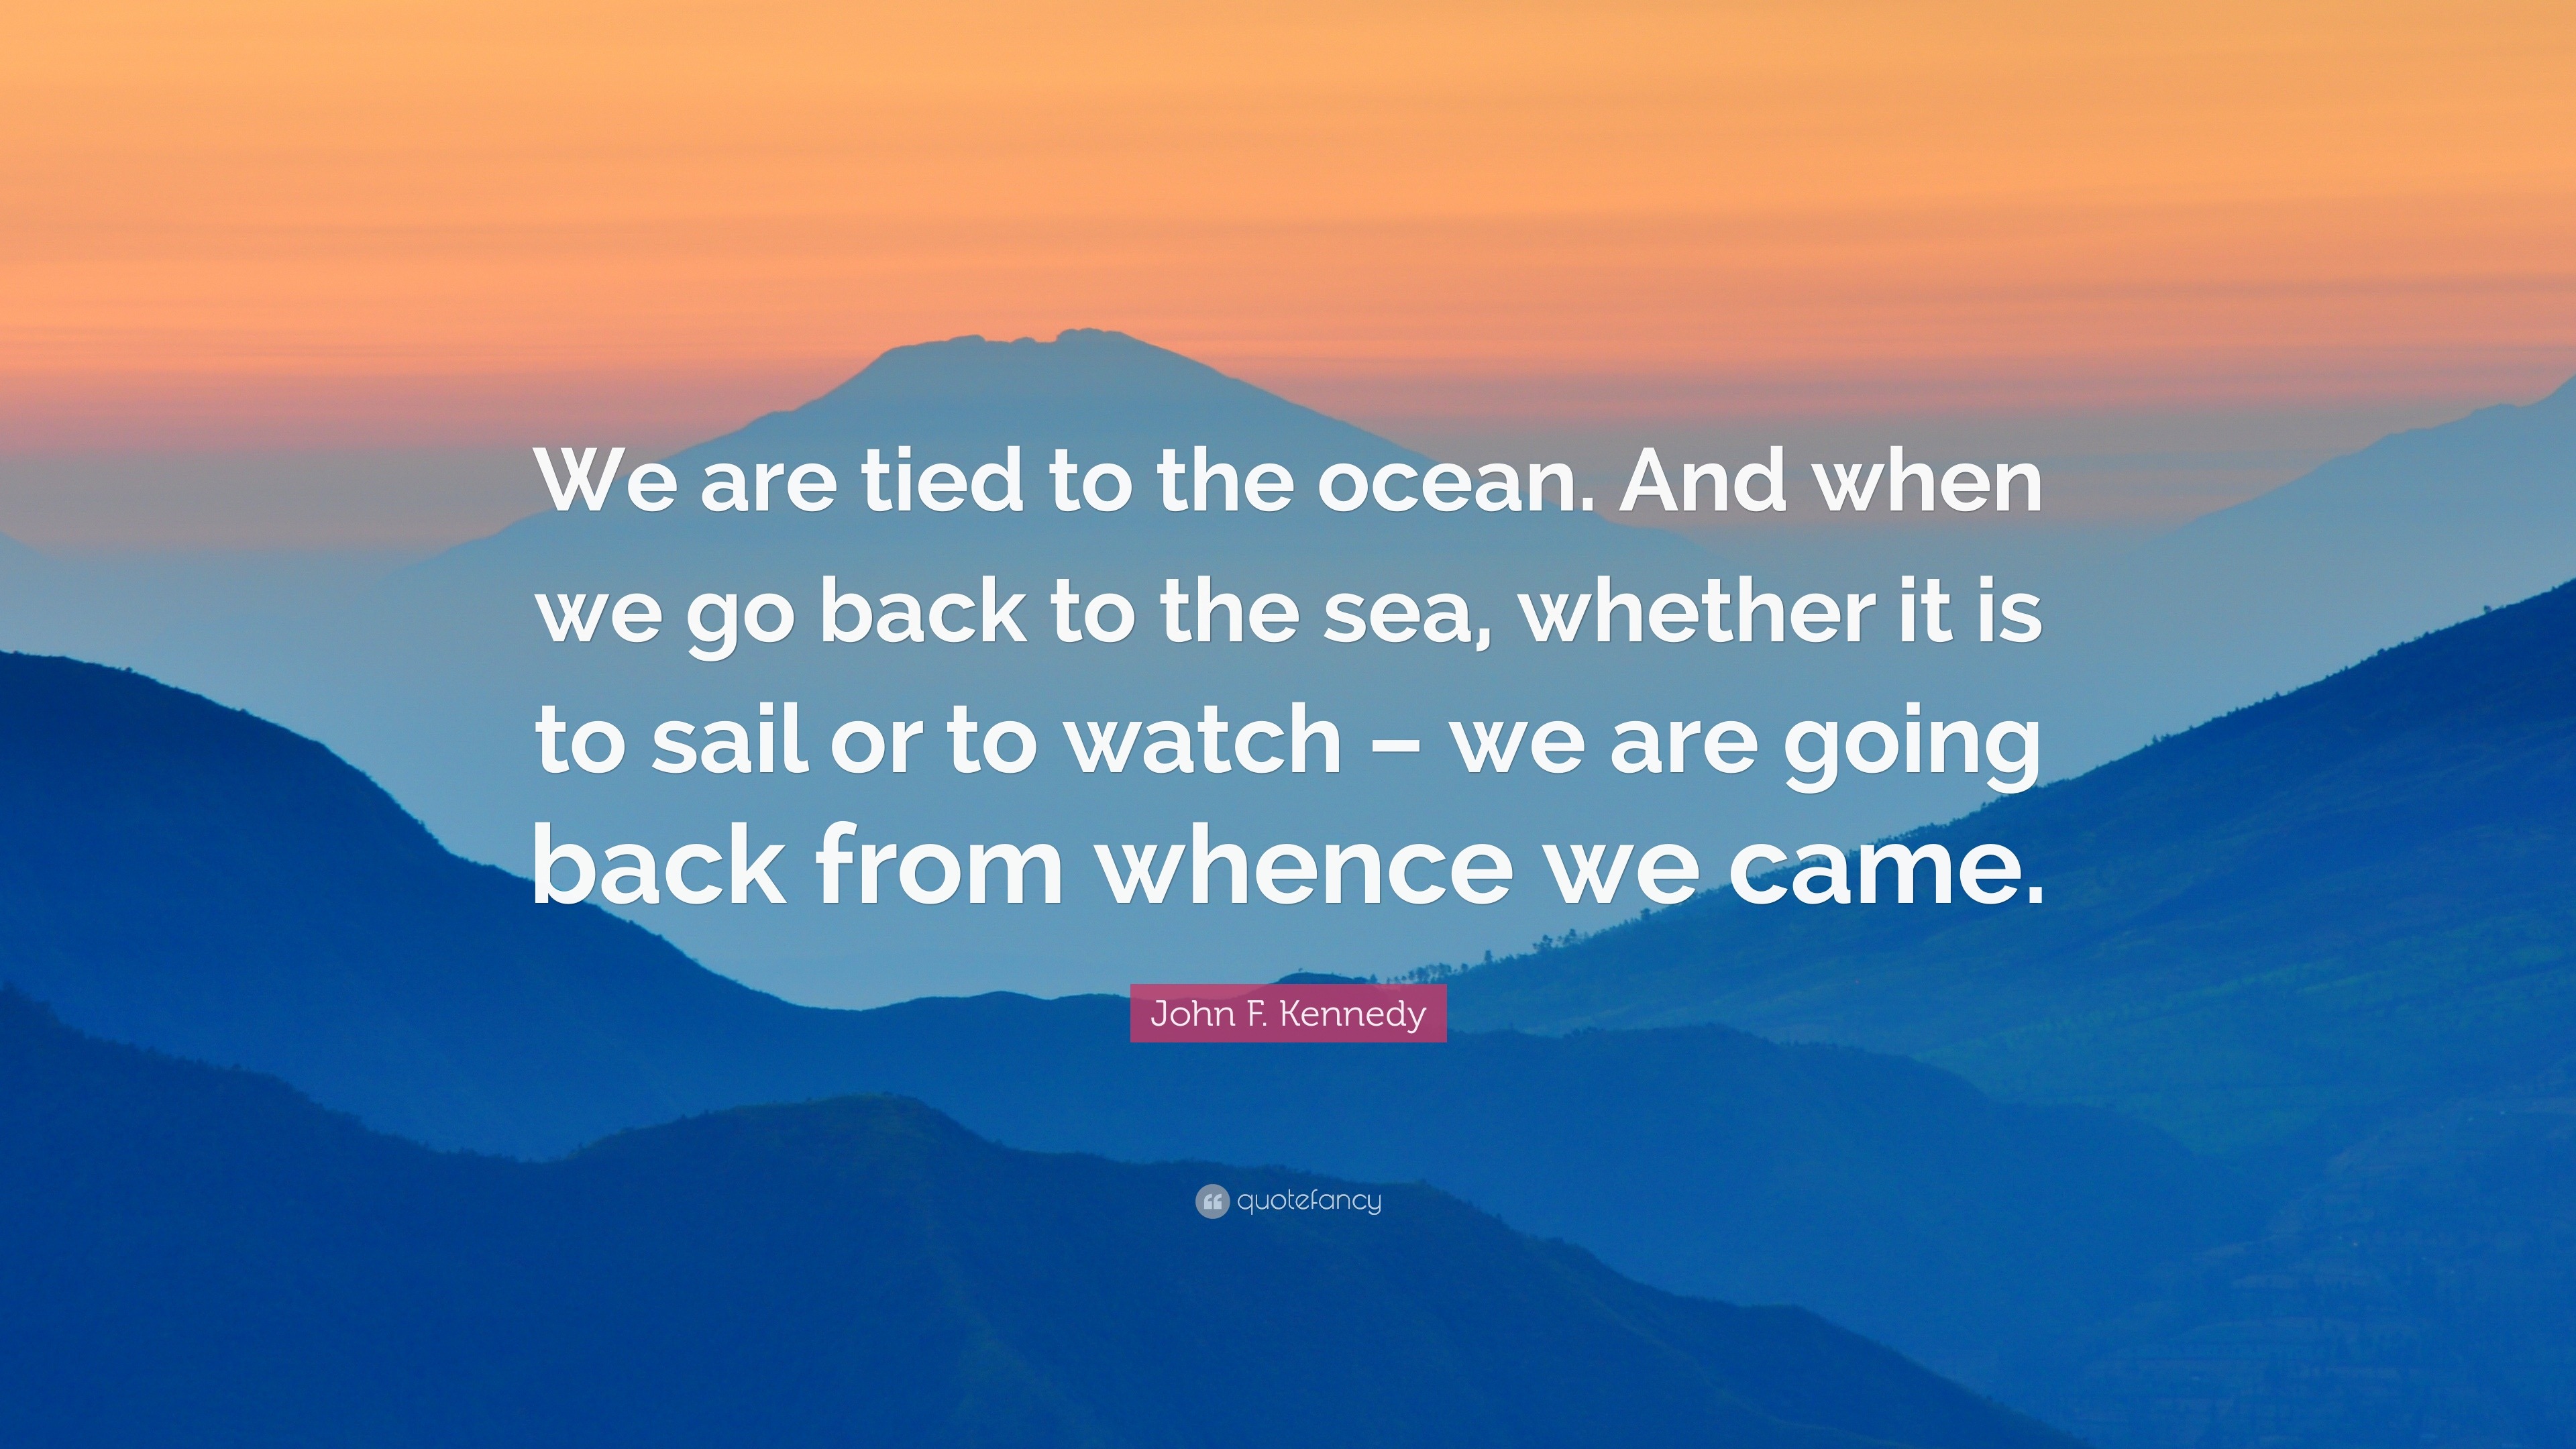 John F. Kennedy Quote: “We are tied to the ocean. And when we go back